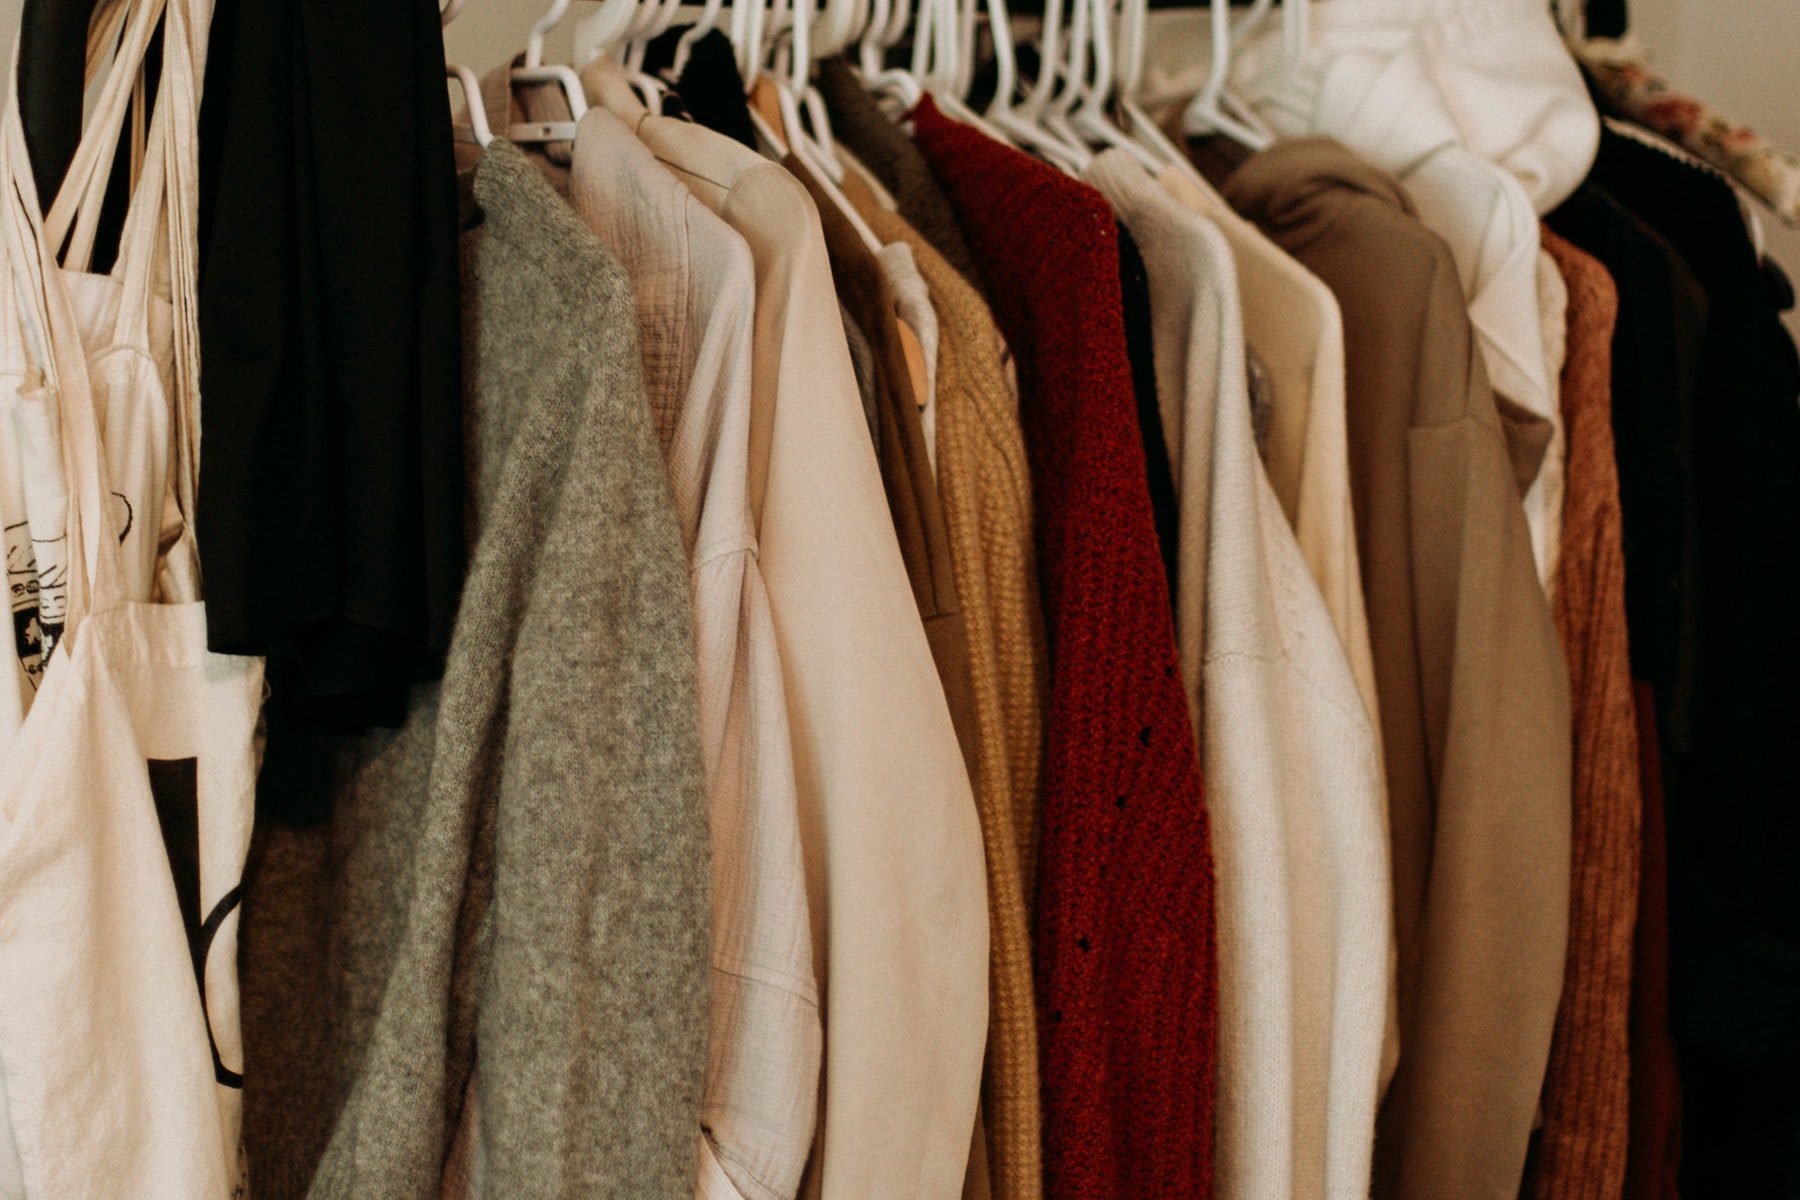 A closet filled with coats and sweaters